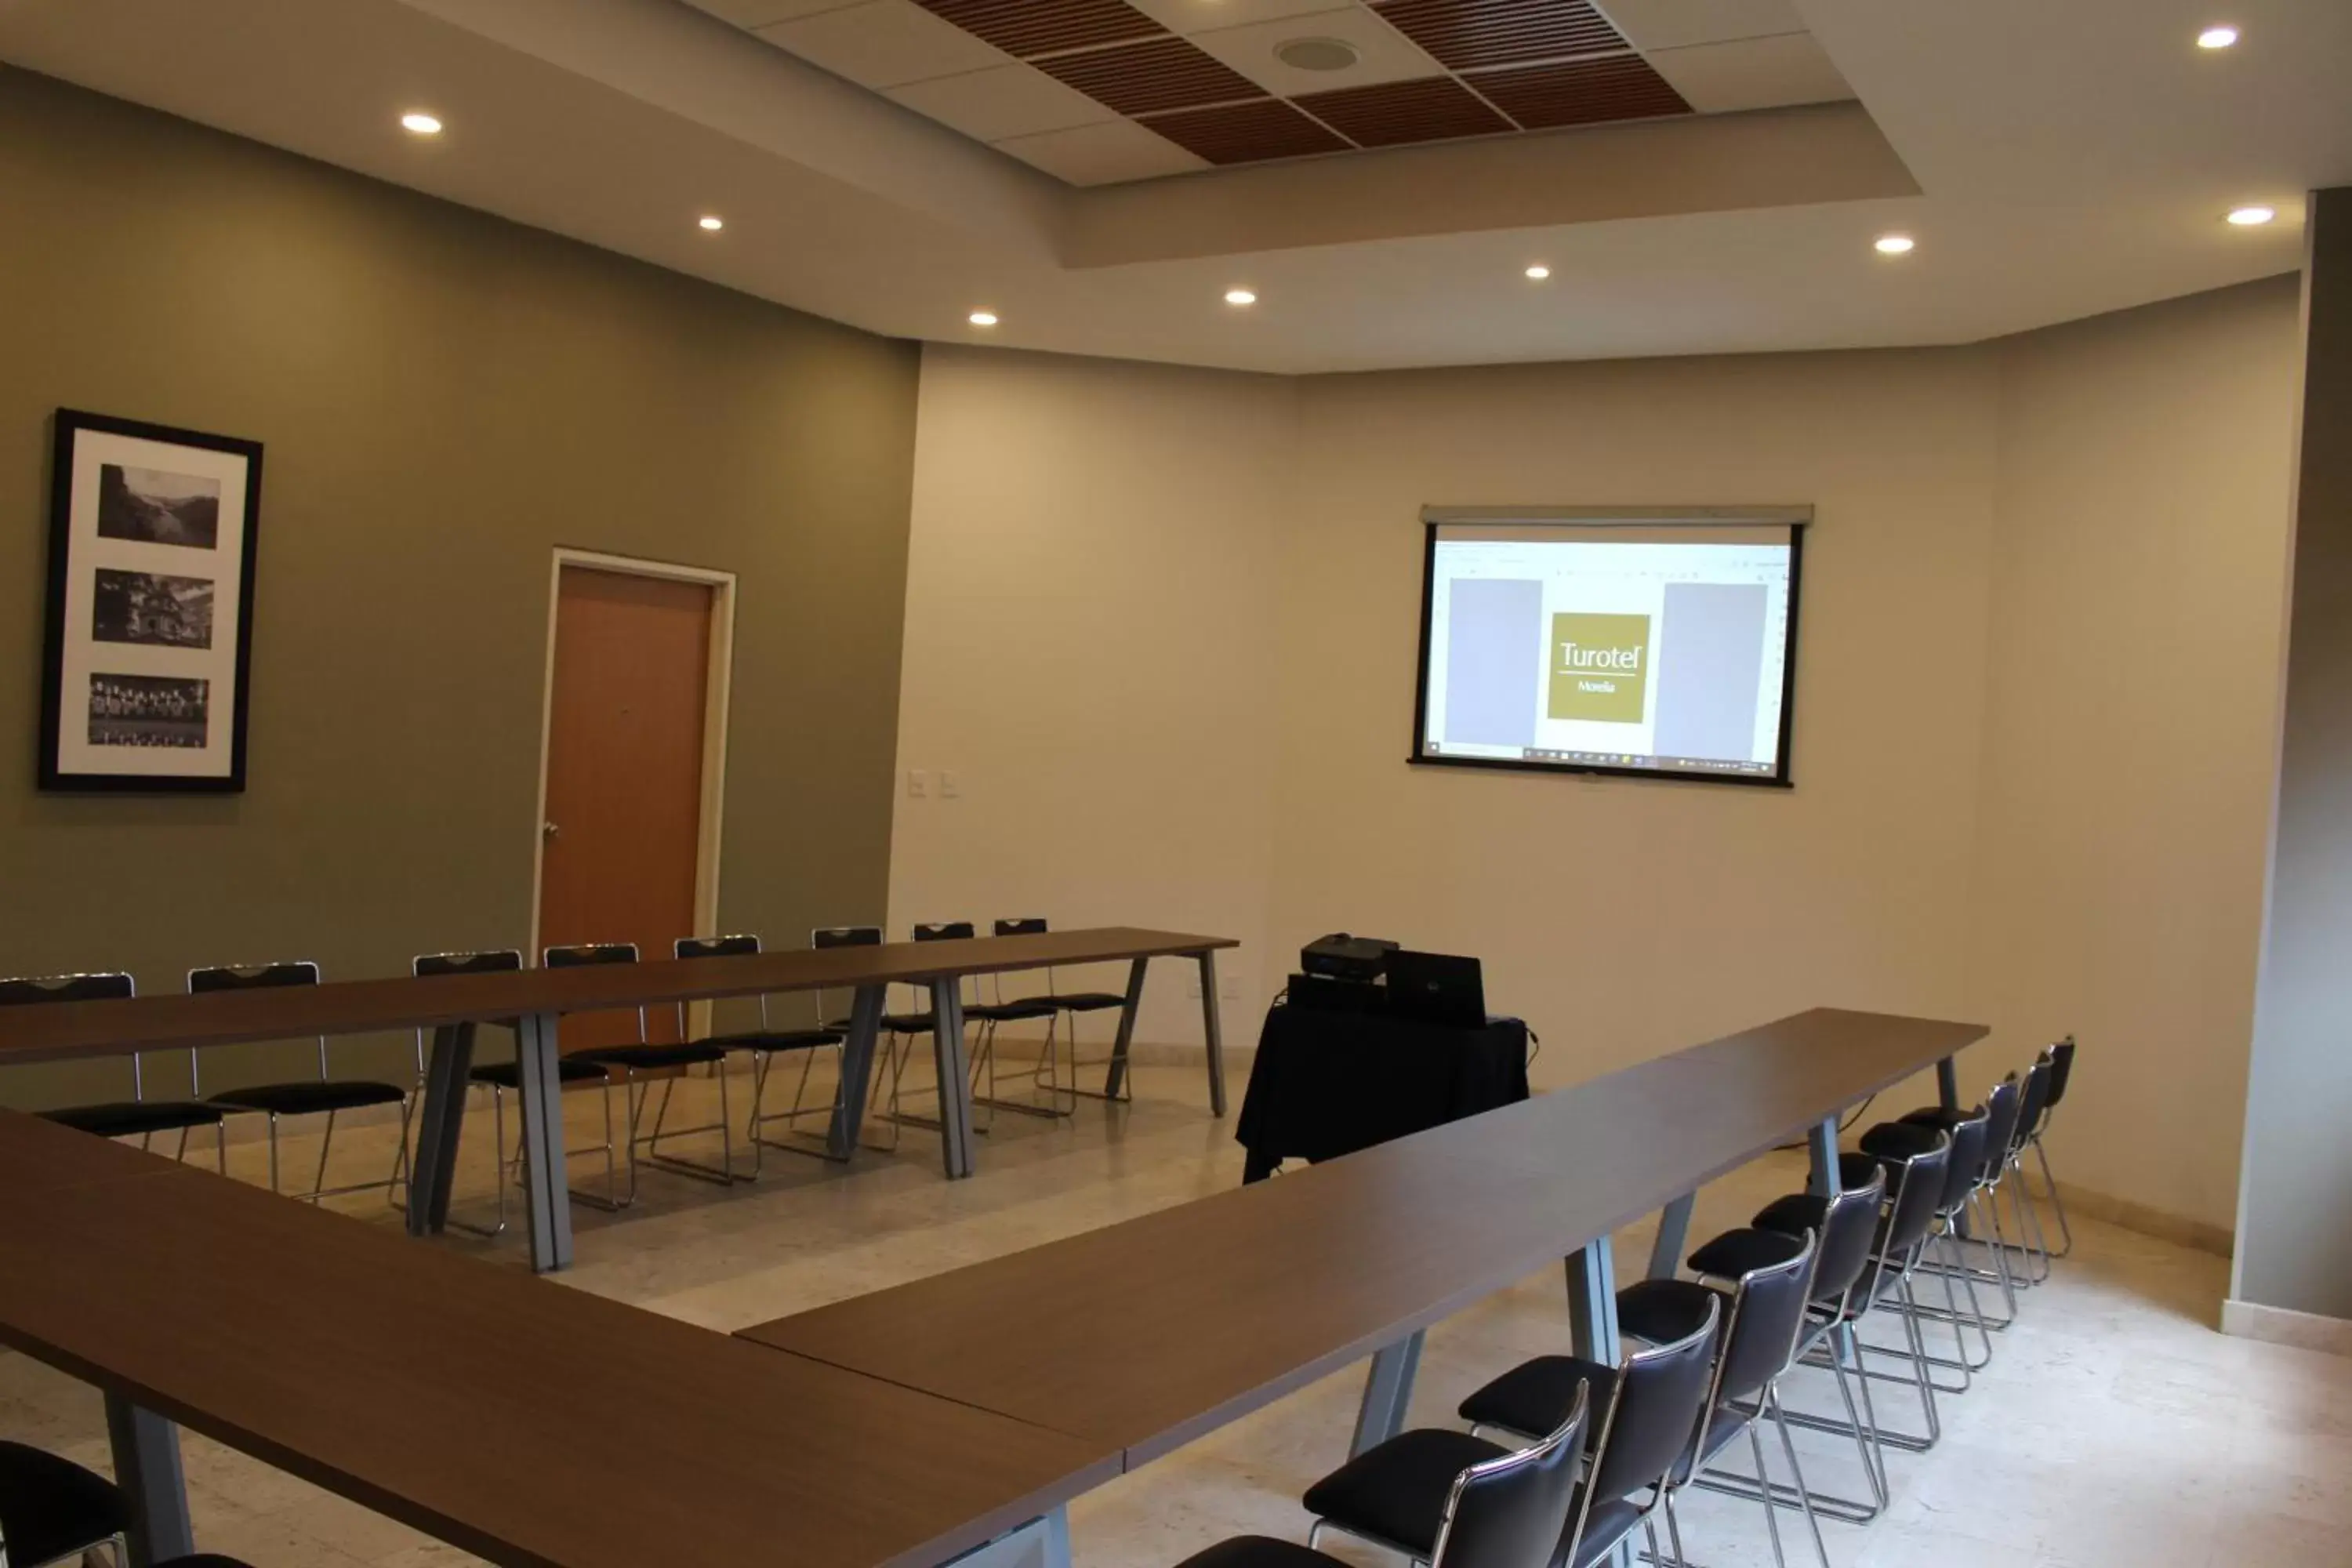 Meeting/conference room in Hotel Turotel Morelia